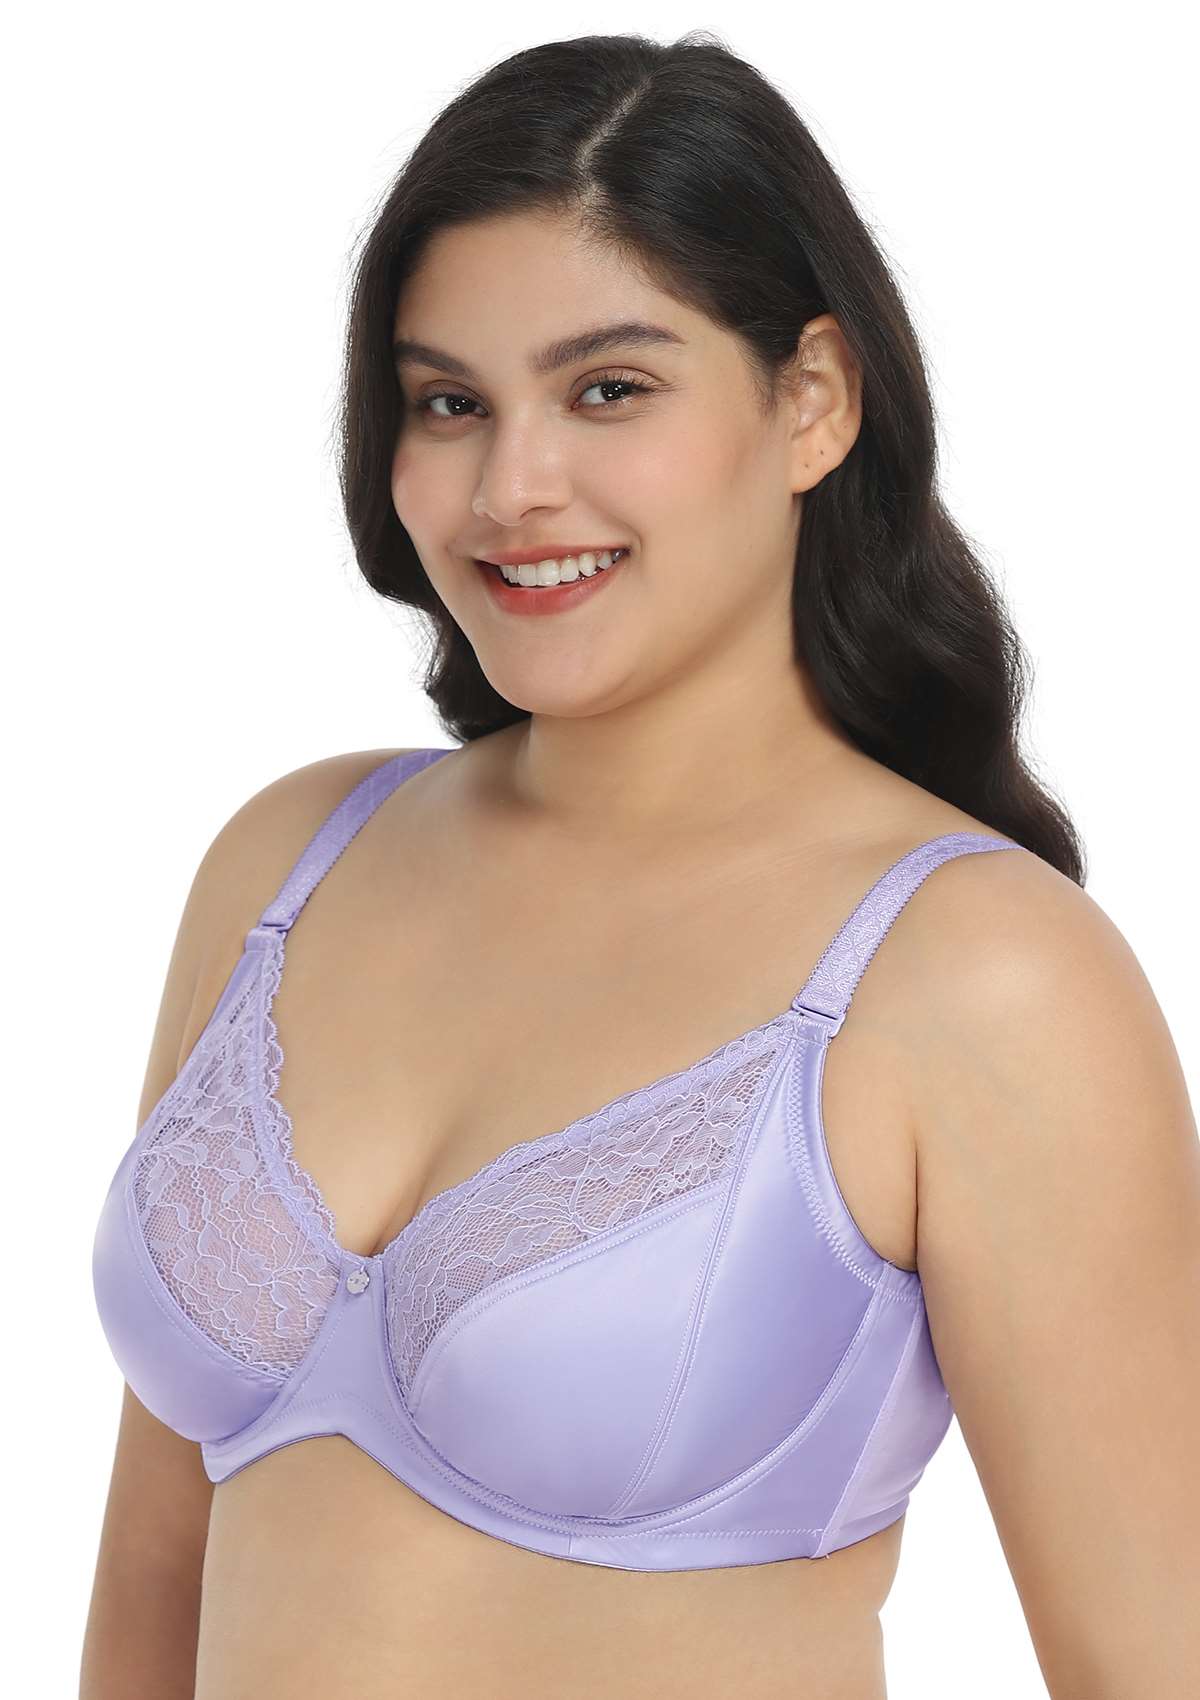 HSIA Foxy Satin Silky Full Coverage Underwire Bra With Floral Lace Trim - Purple / 38 / D